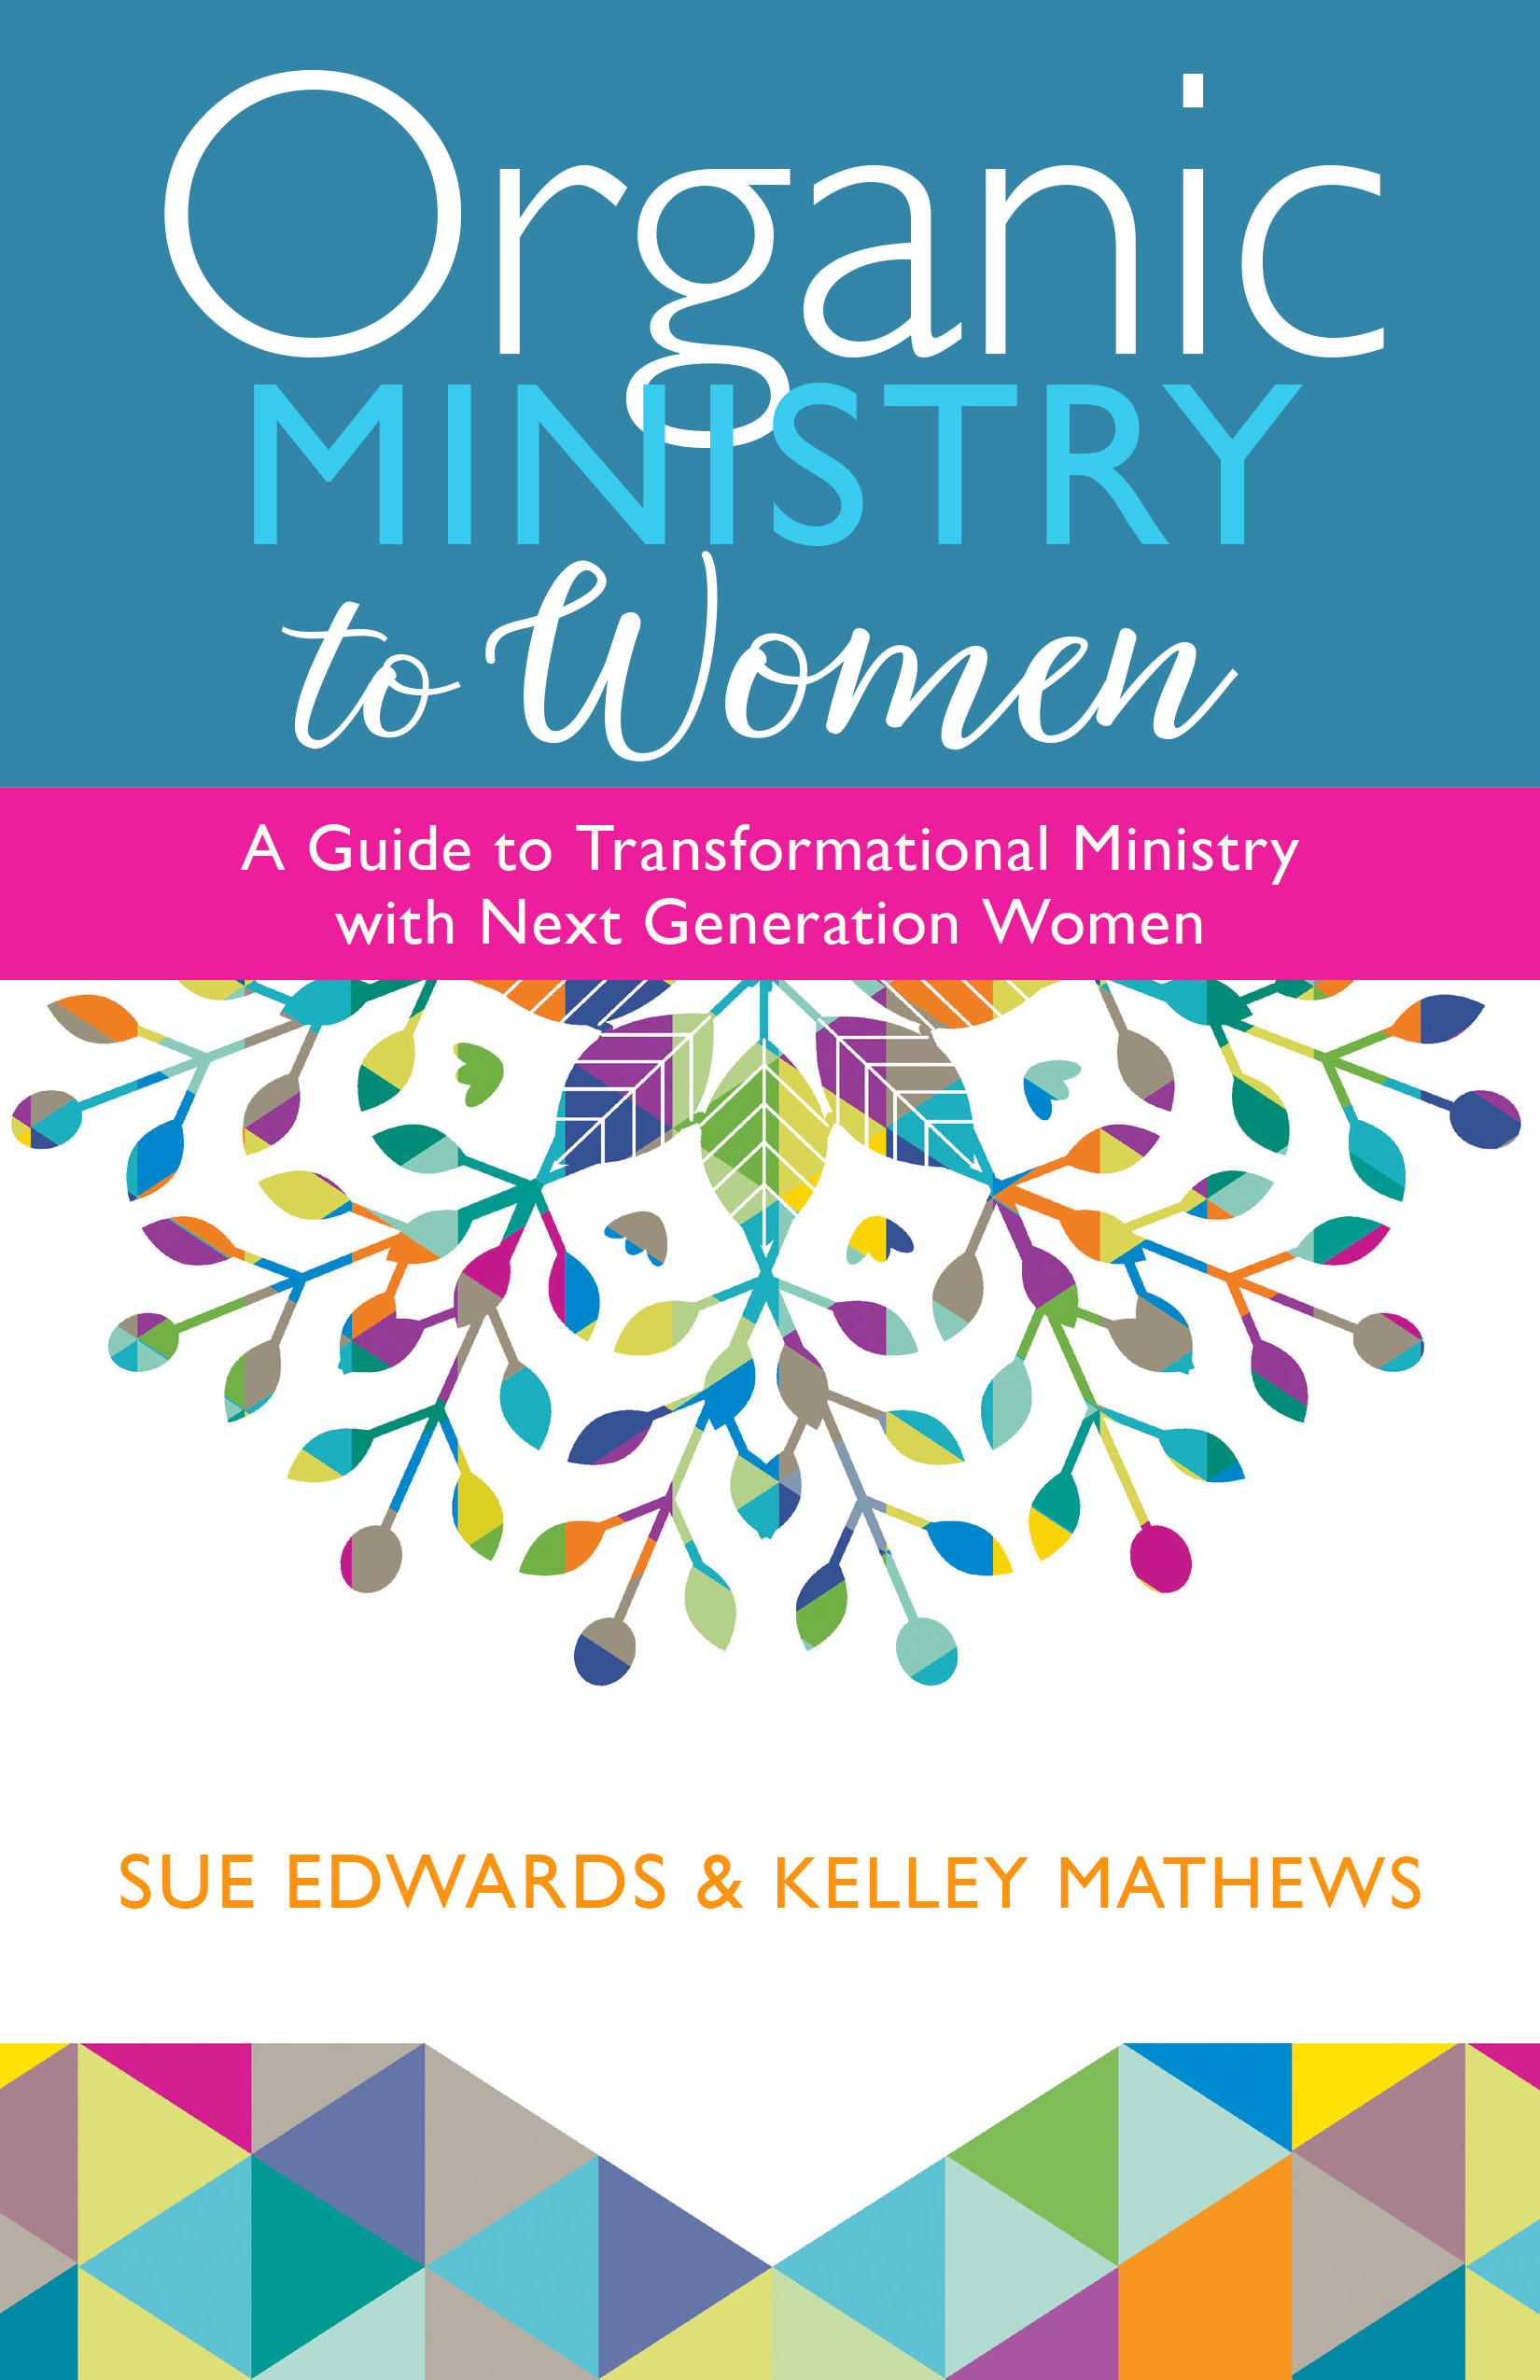 Organic Ministry to Women: A Guide to Transformational Ministry with Next Generation Women by Sue Edwards & Kelley Mathews